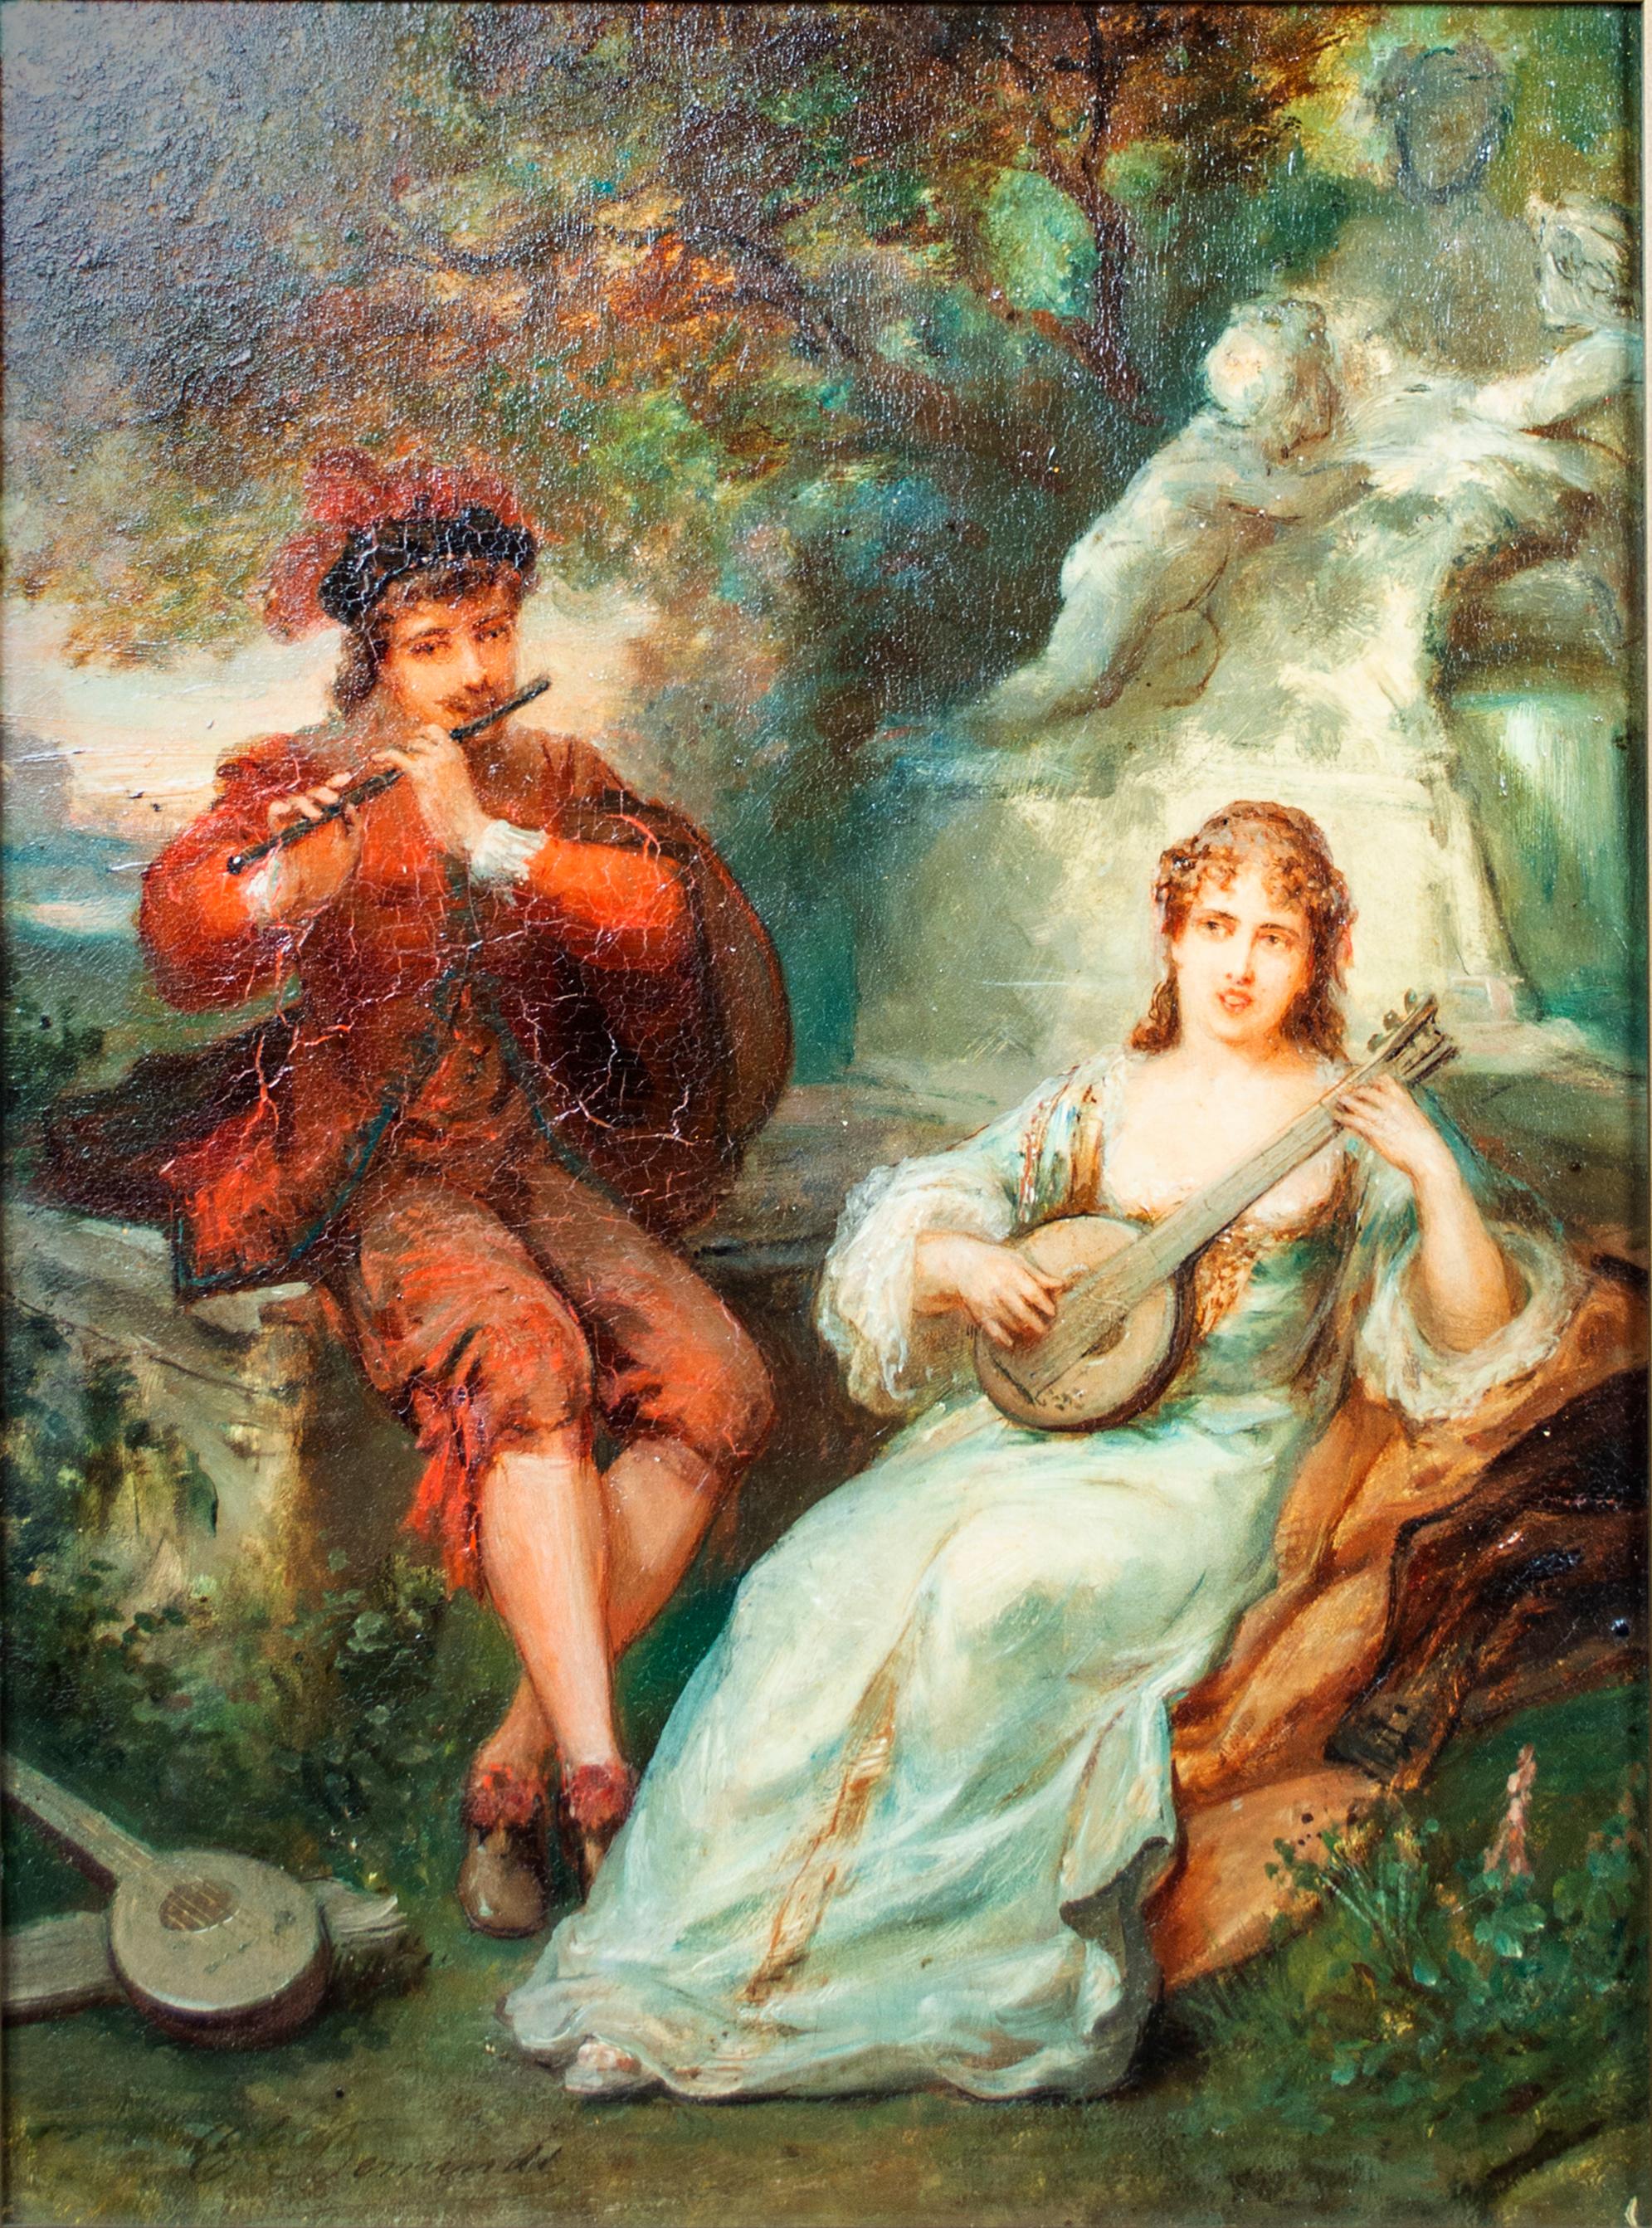 'Two Musicians' original signed oil on mahogany painting, garden 19th century - Painting by Émile Bemindt